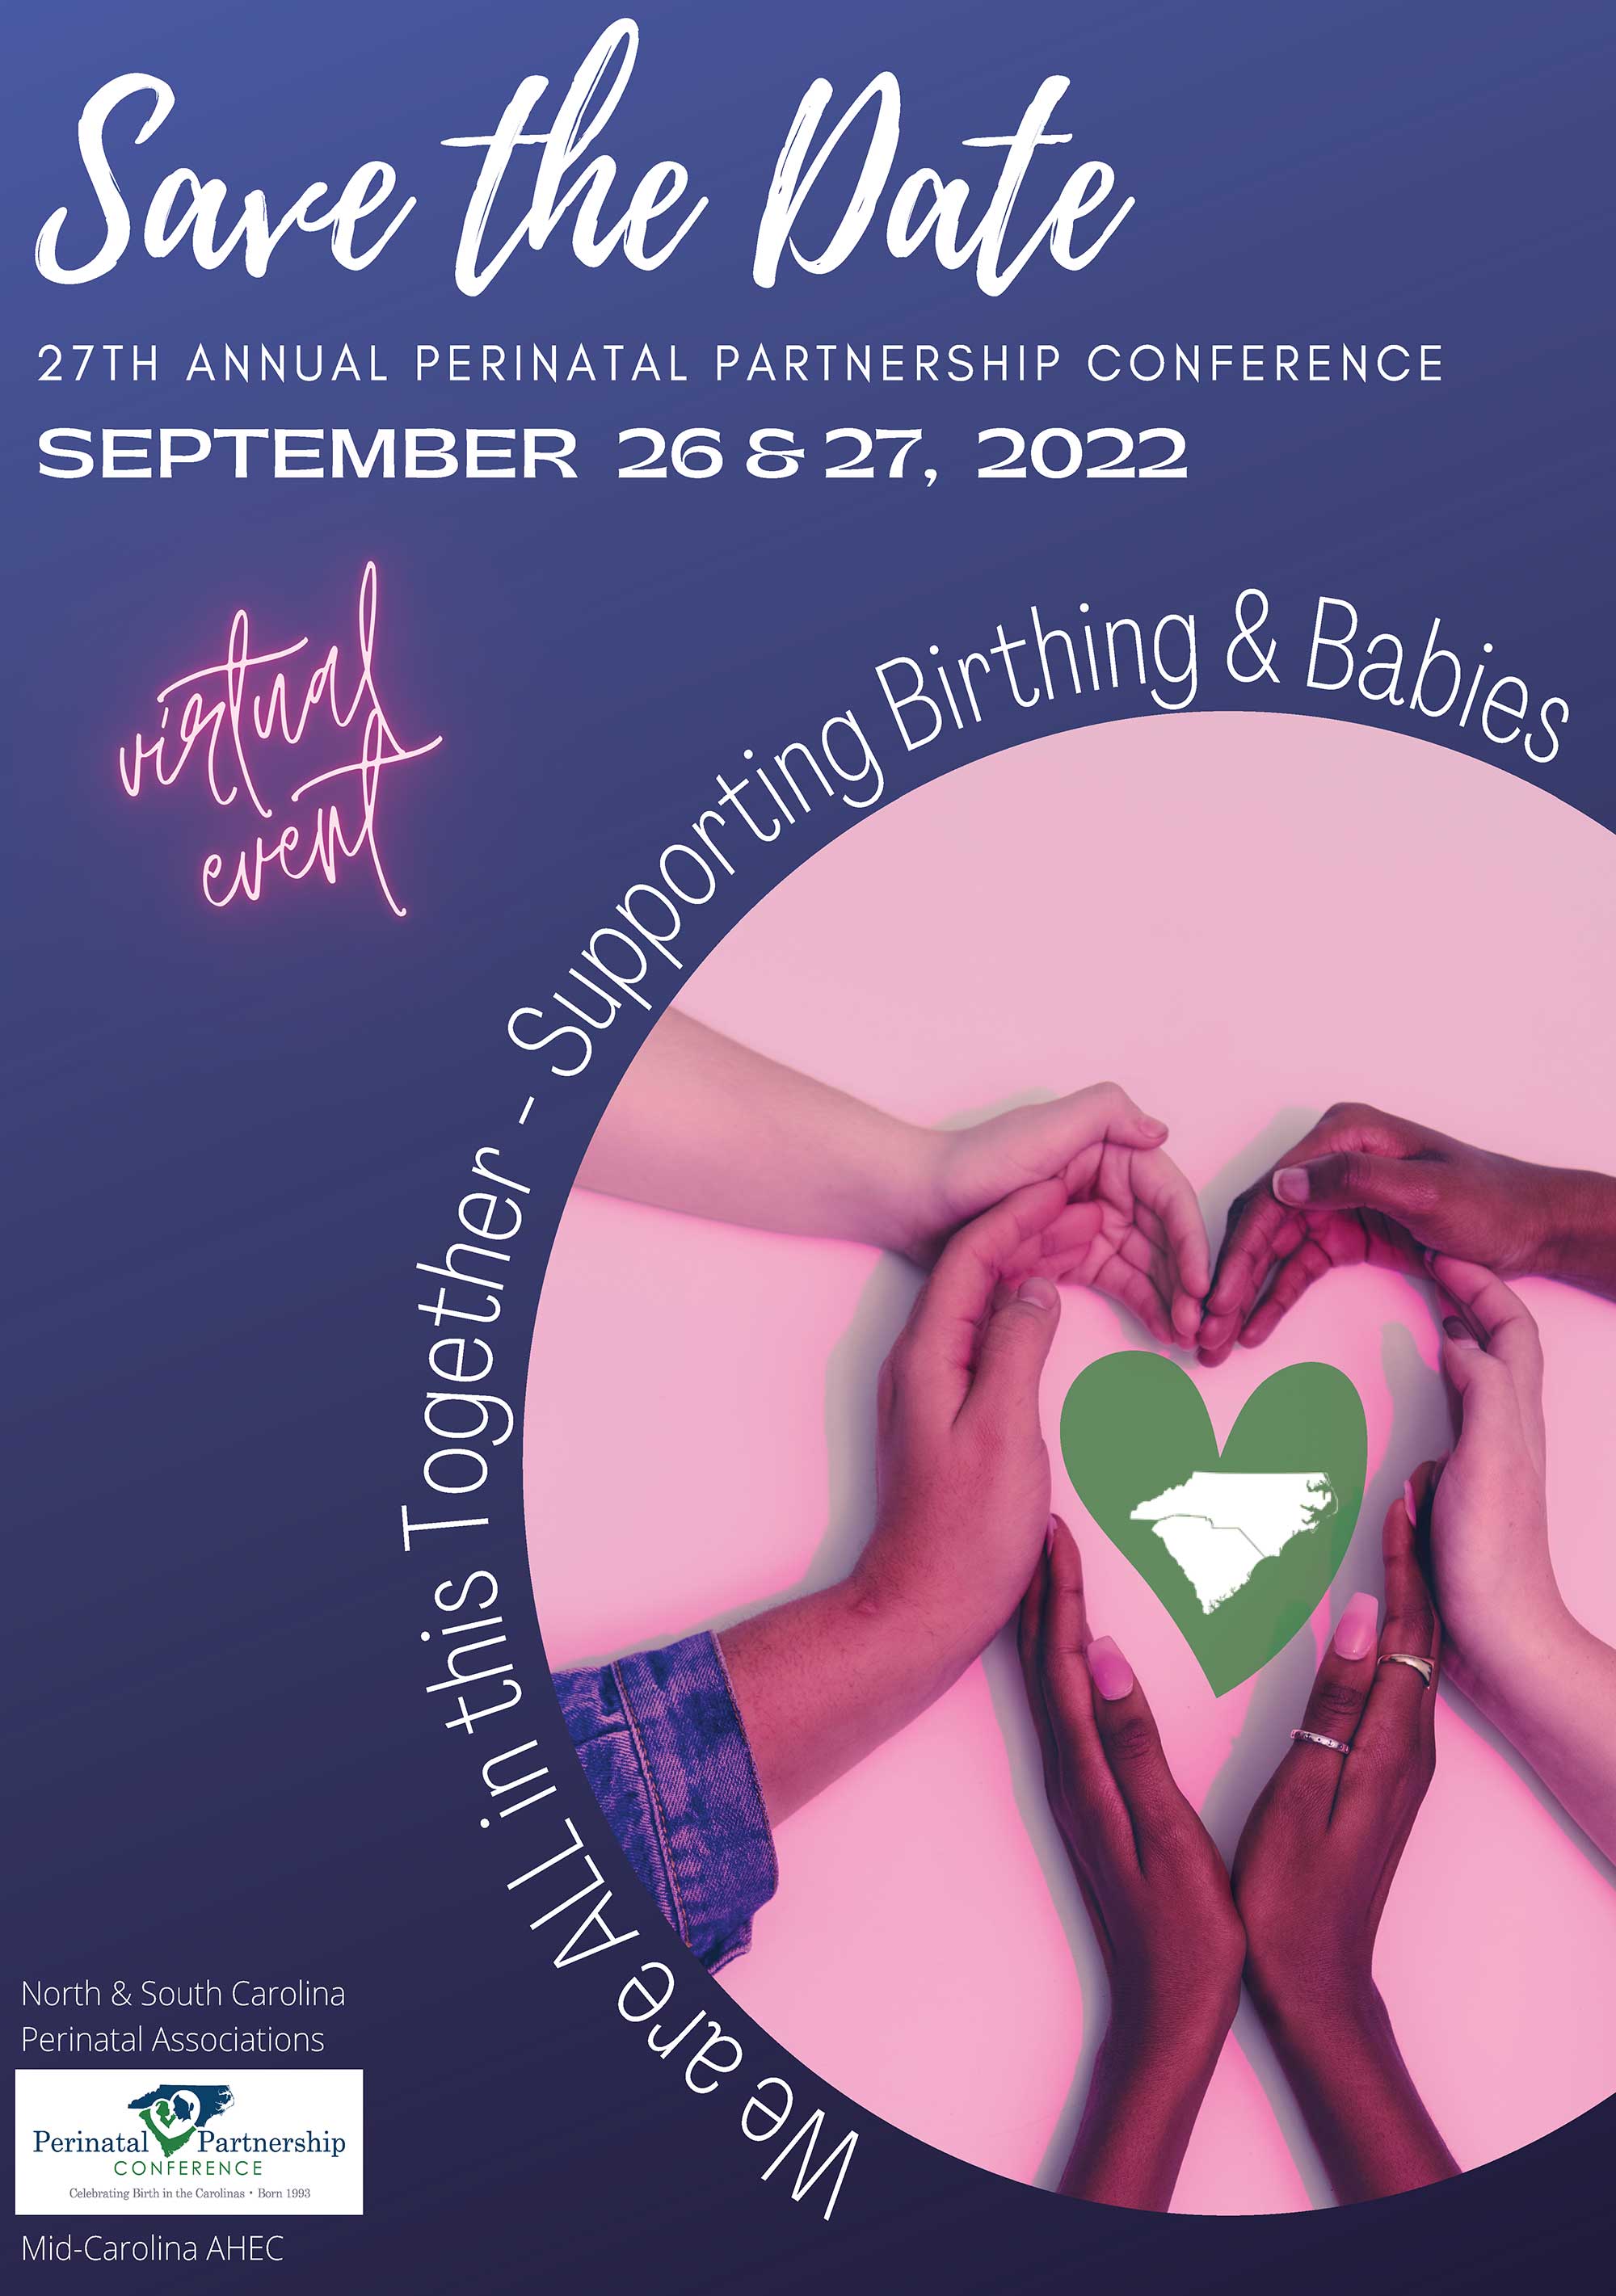 save the date 27th annual perinatal partnership conference september 26-27 2022